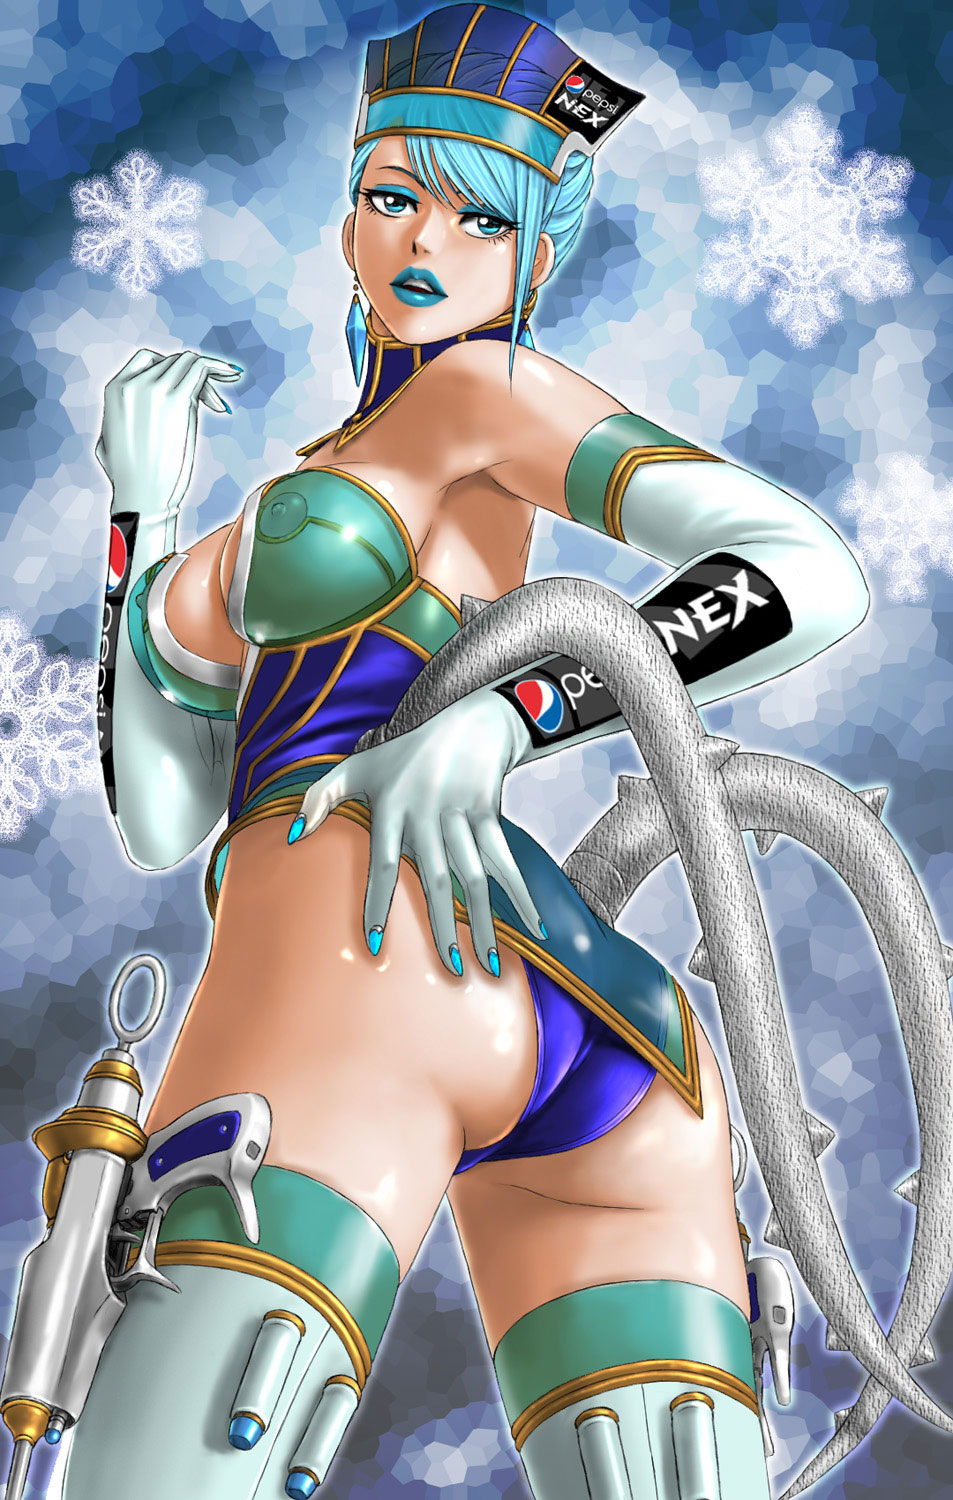 Blue Rose - Tiger and Bunny Hentai Image. 